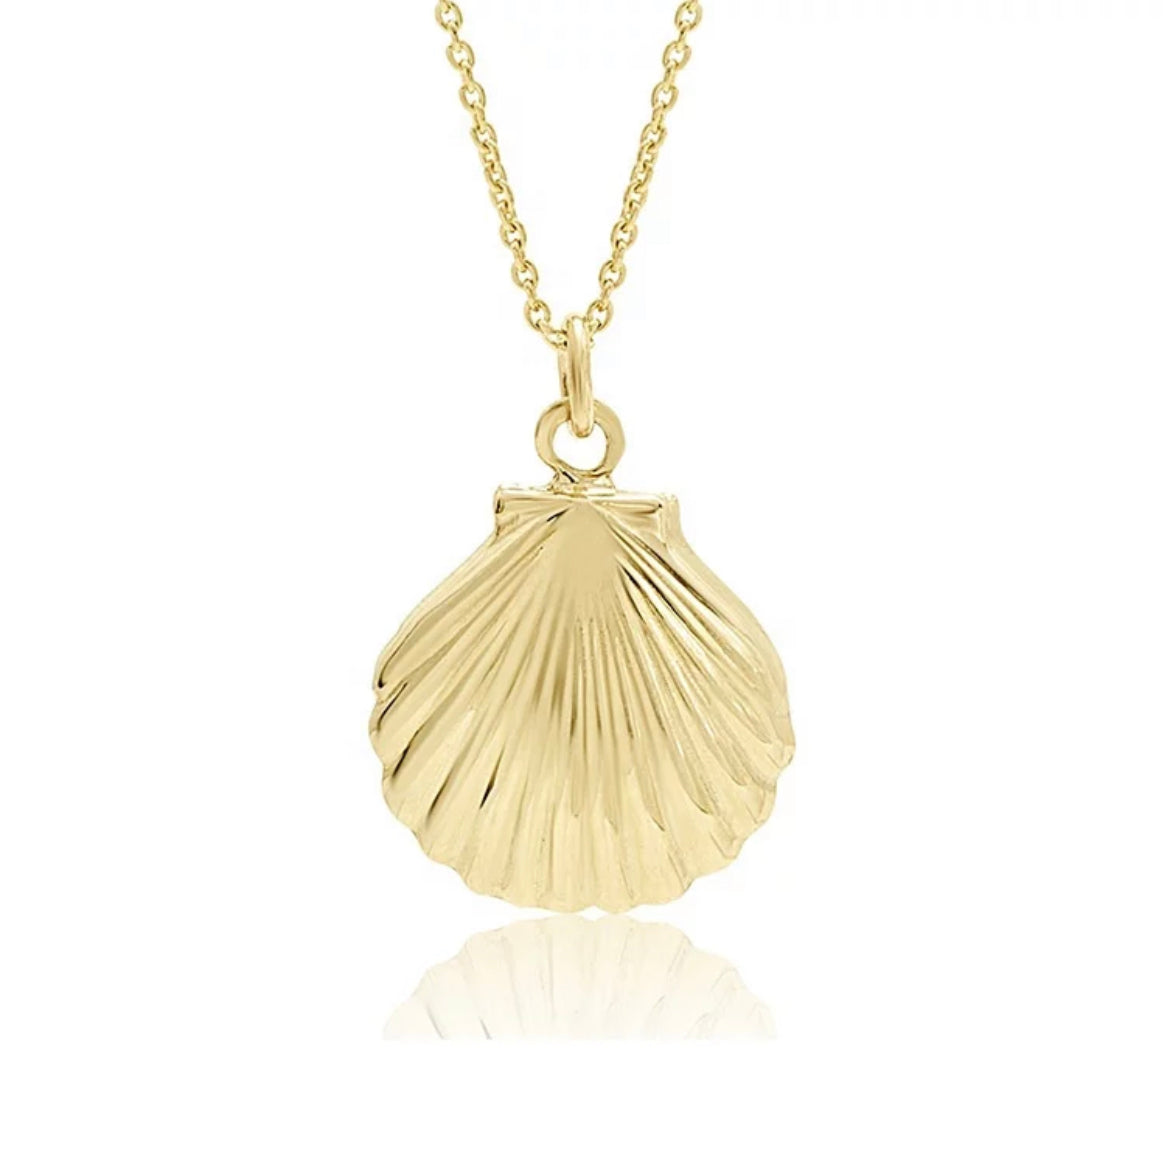 SCALLOP Shell Necklace | 14kt Gold